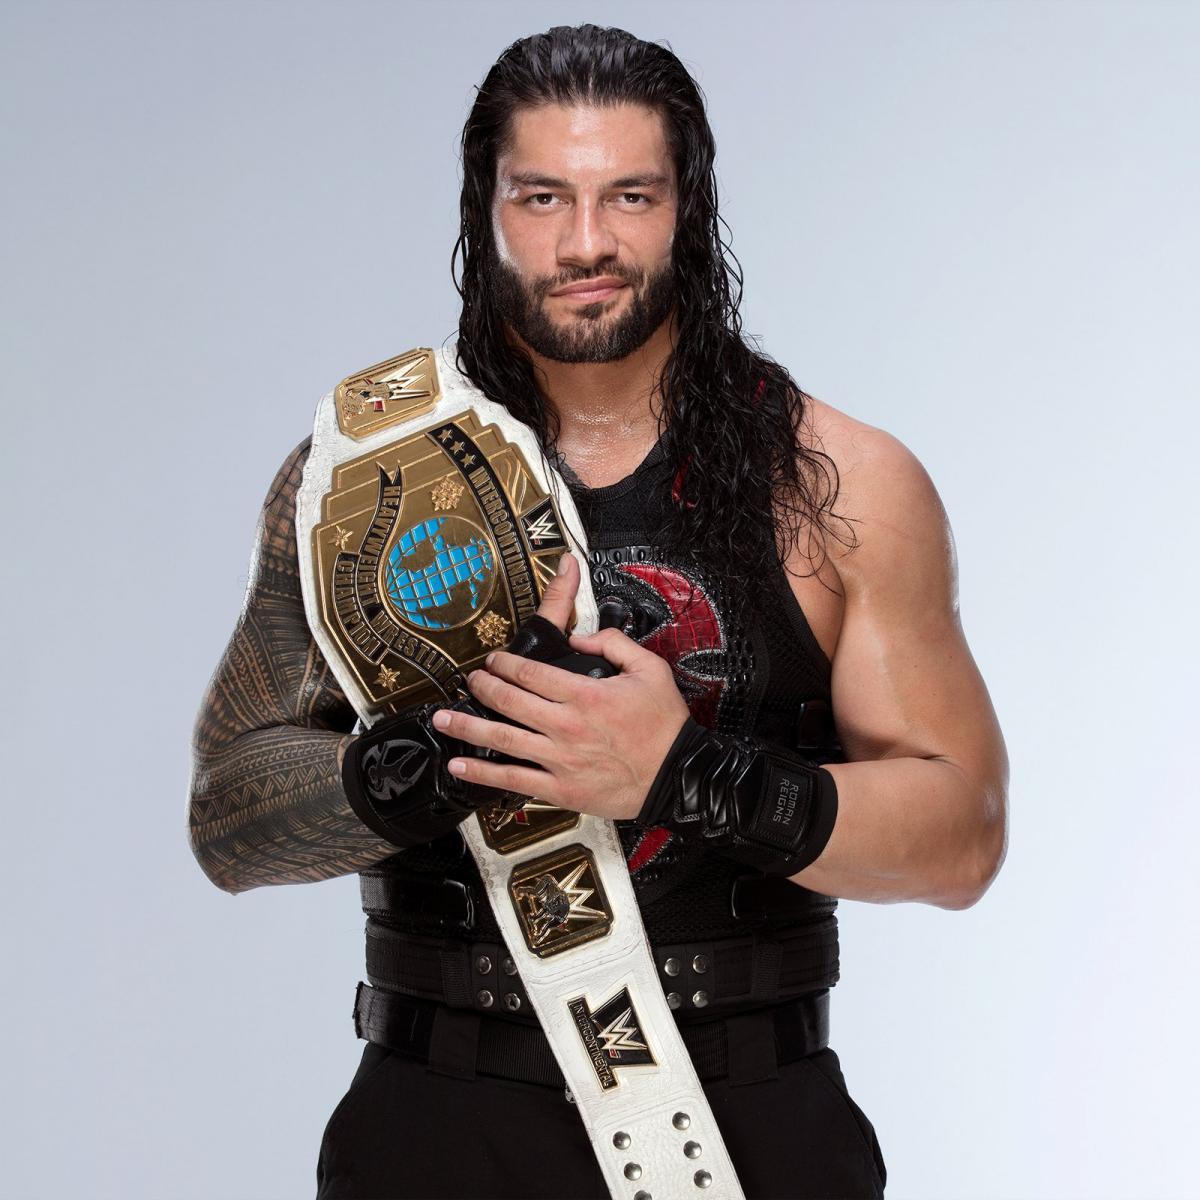 Roman Reigns' first picture as Intercontinental Champion: photo